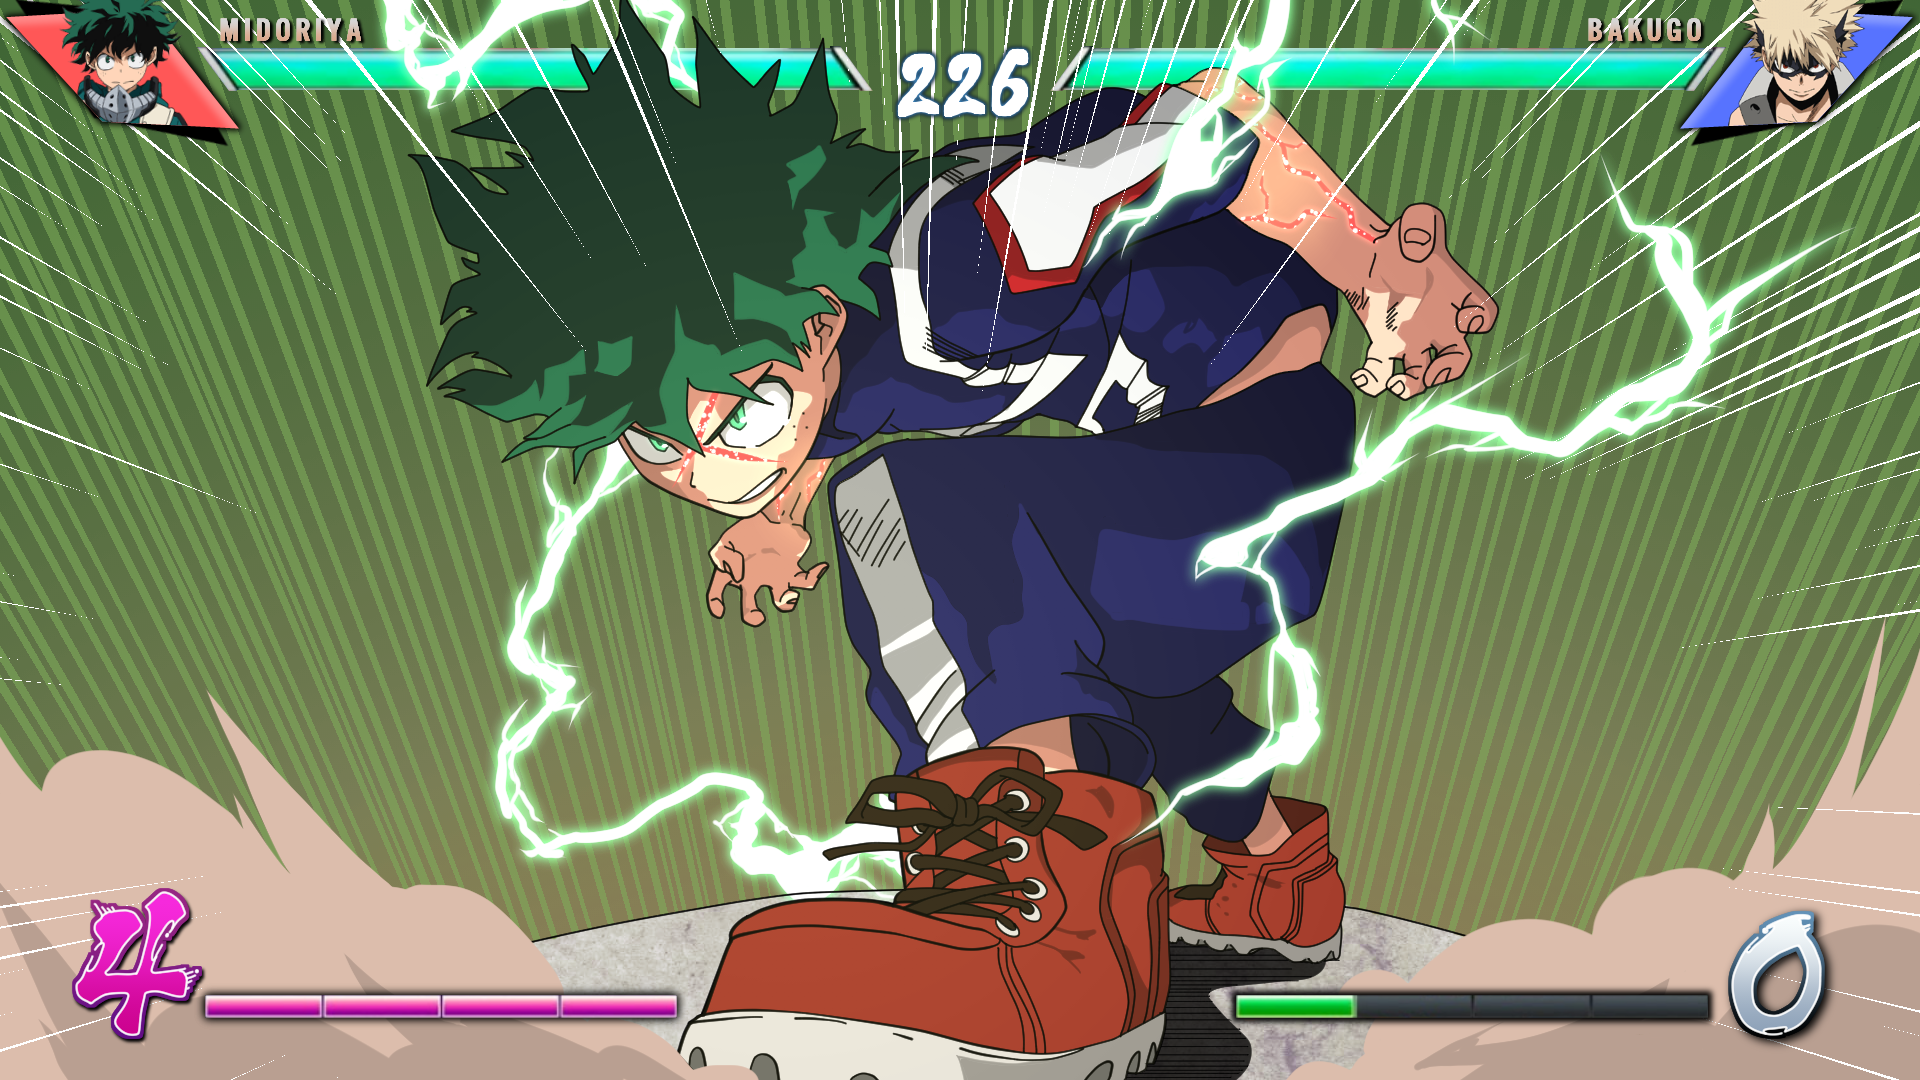 ShonenGameZ's call for BNHA Fighting Game